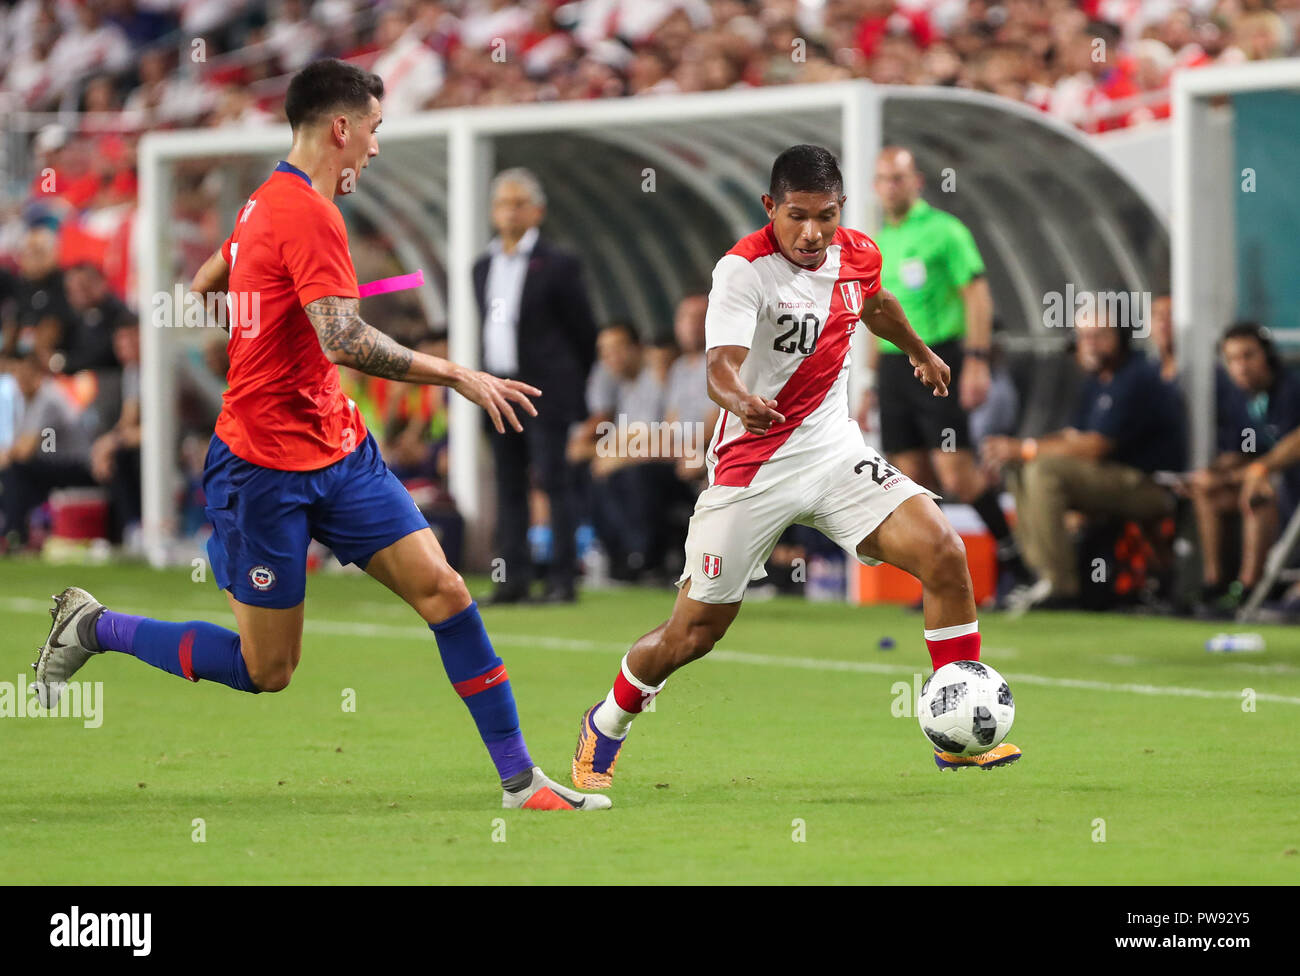 Miami Gardens, Florida, USA. 12th Oct, 2018. Peru midfielder EDISON FLORES (20) drives the ball, challenged by Chile defender ENZO ROCO (3), during an international friendly match between the Peru and Chile national soccer teams, at the Hard Rock Stadium in Miami Gardens, Florida. Credit: Mario Houben/ZUMA Wire/Alamy Live News Stock Photo